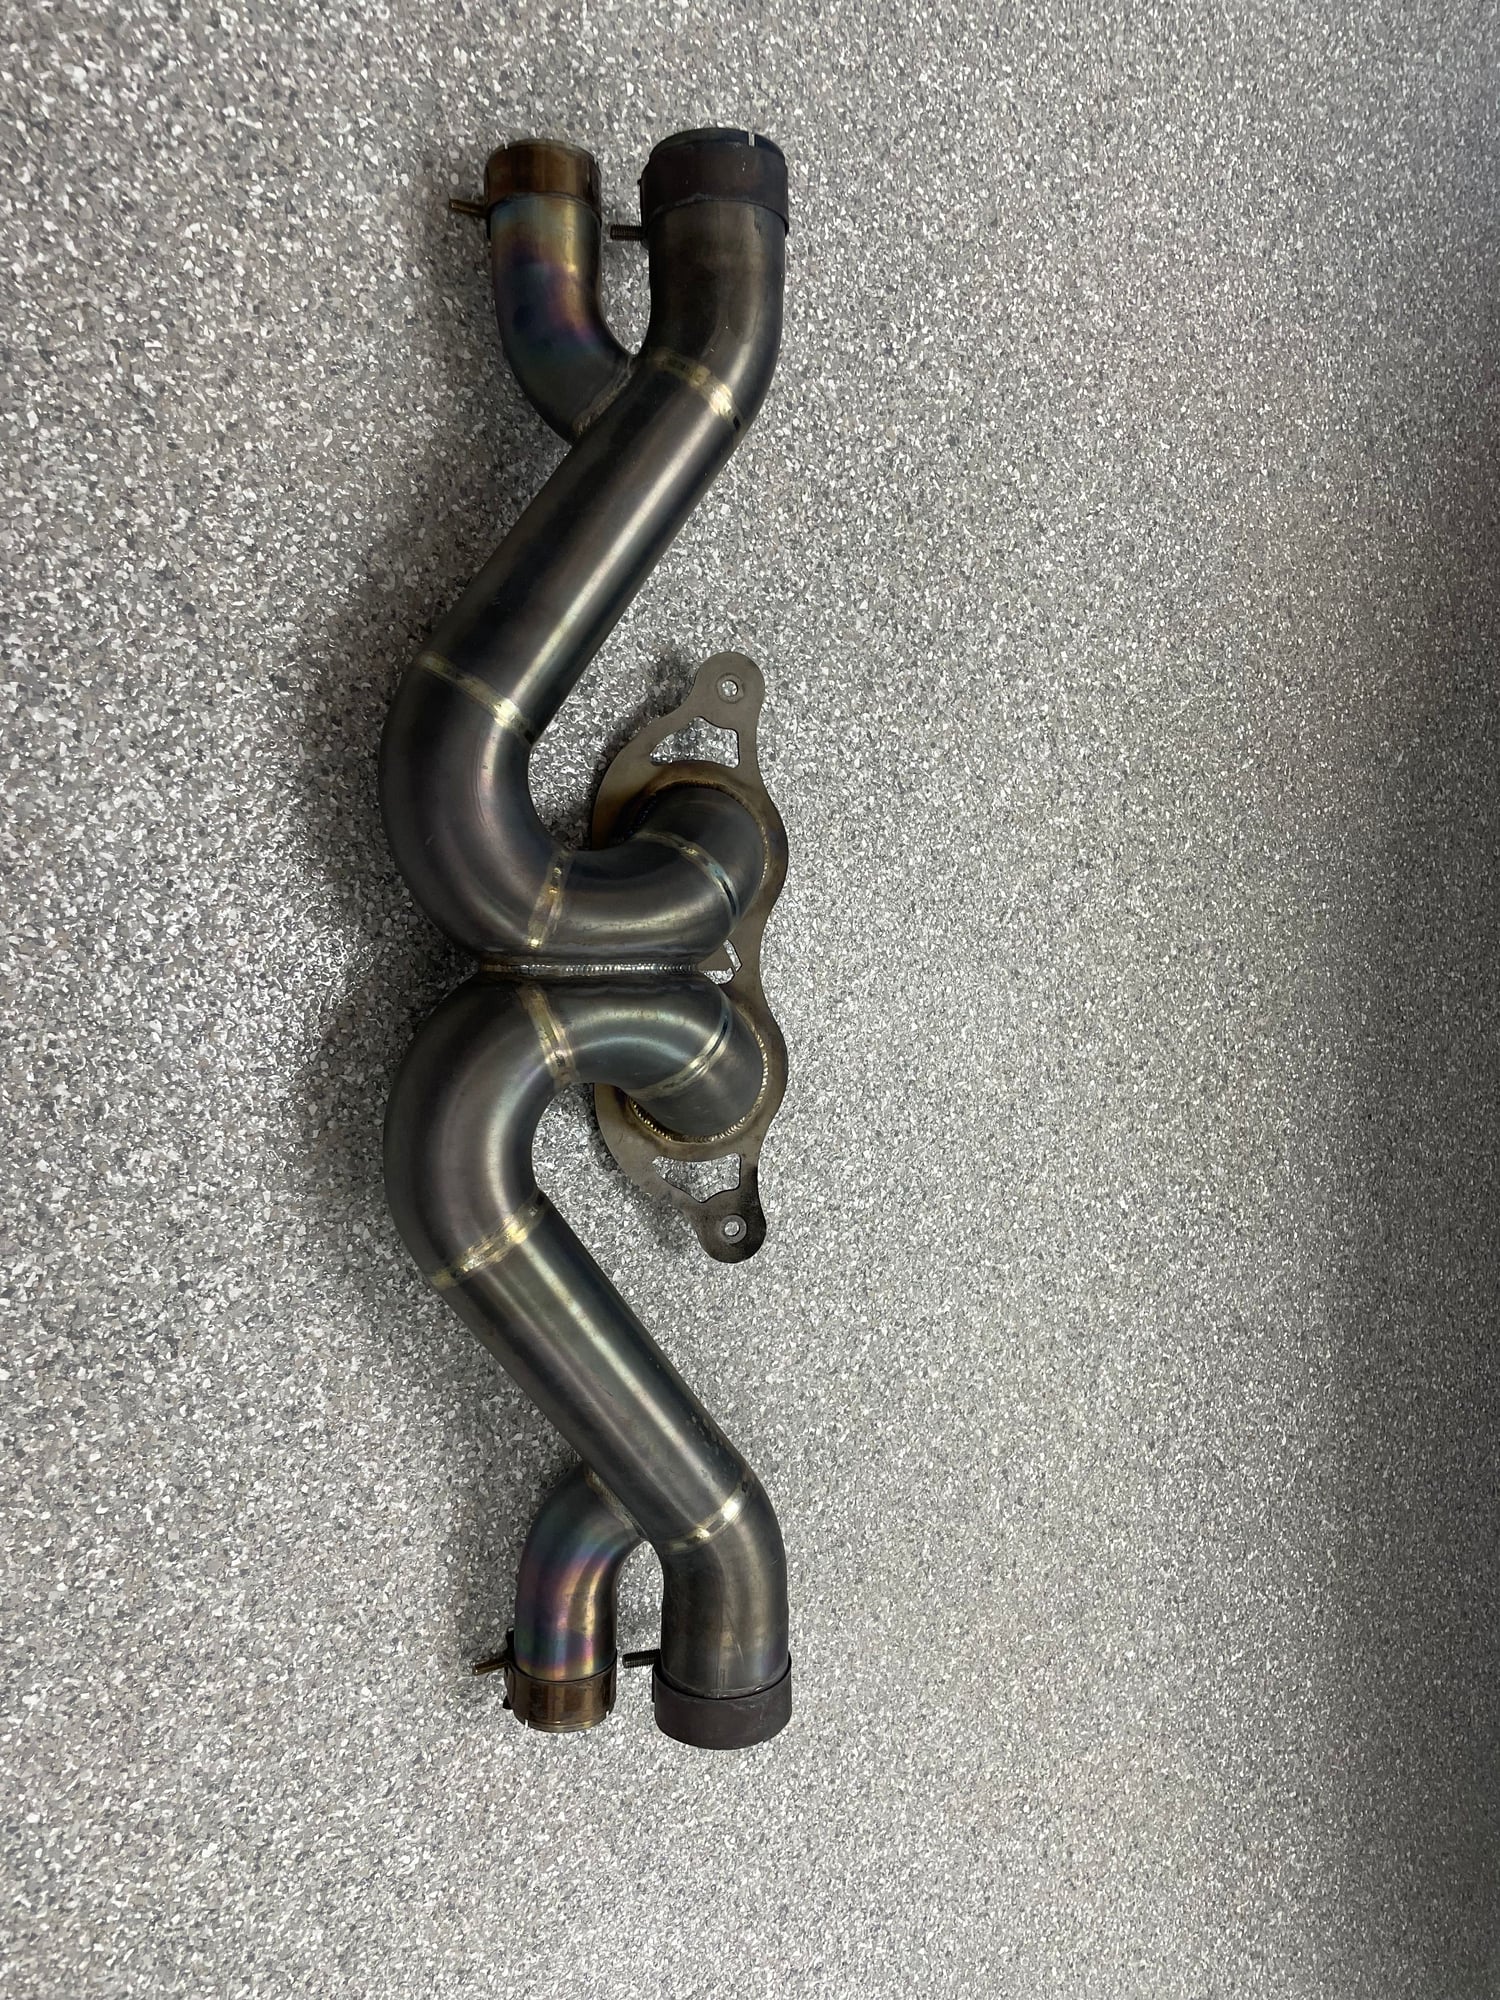 Engine - Exhaust - JCR Superlight titanium center bypass - Used - All Years  All Models - Encinitas, CA 92024, United States